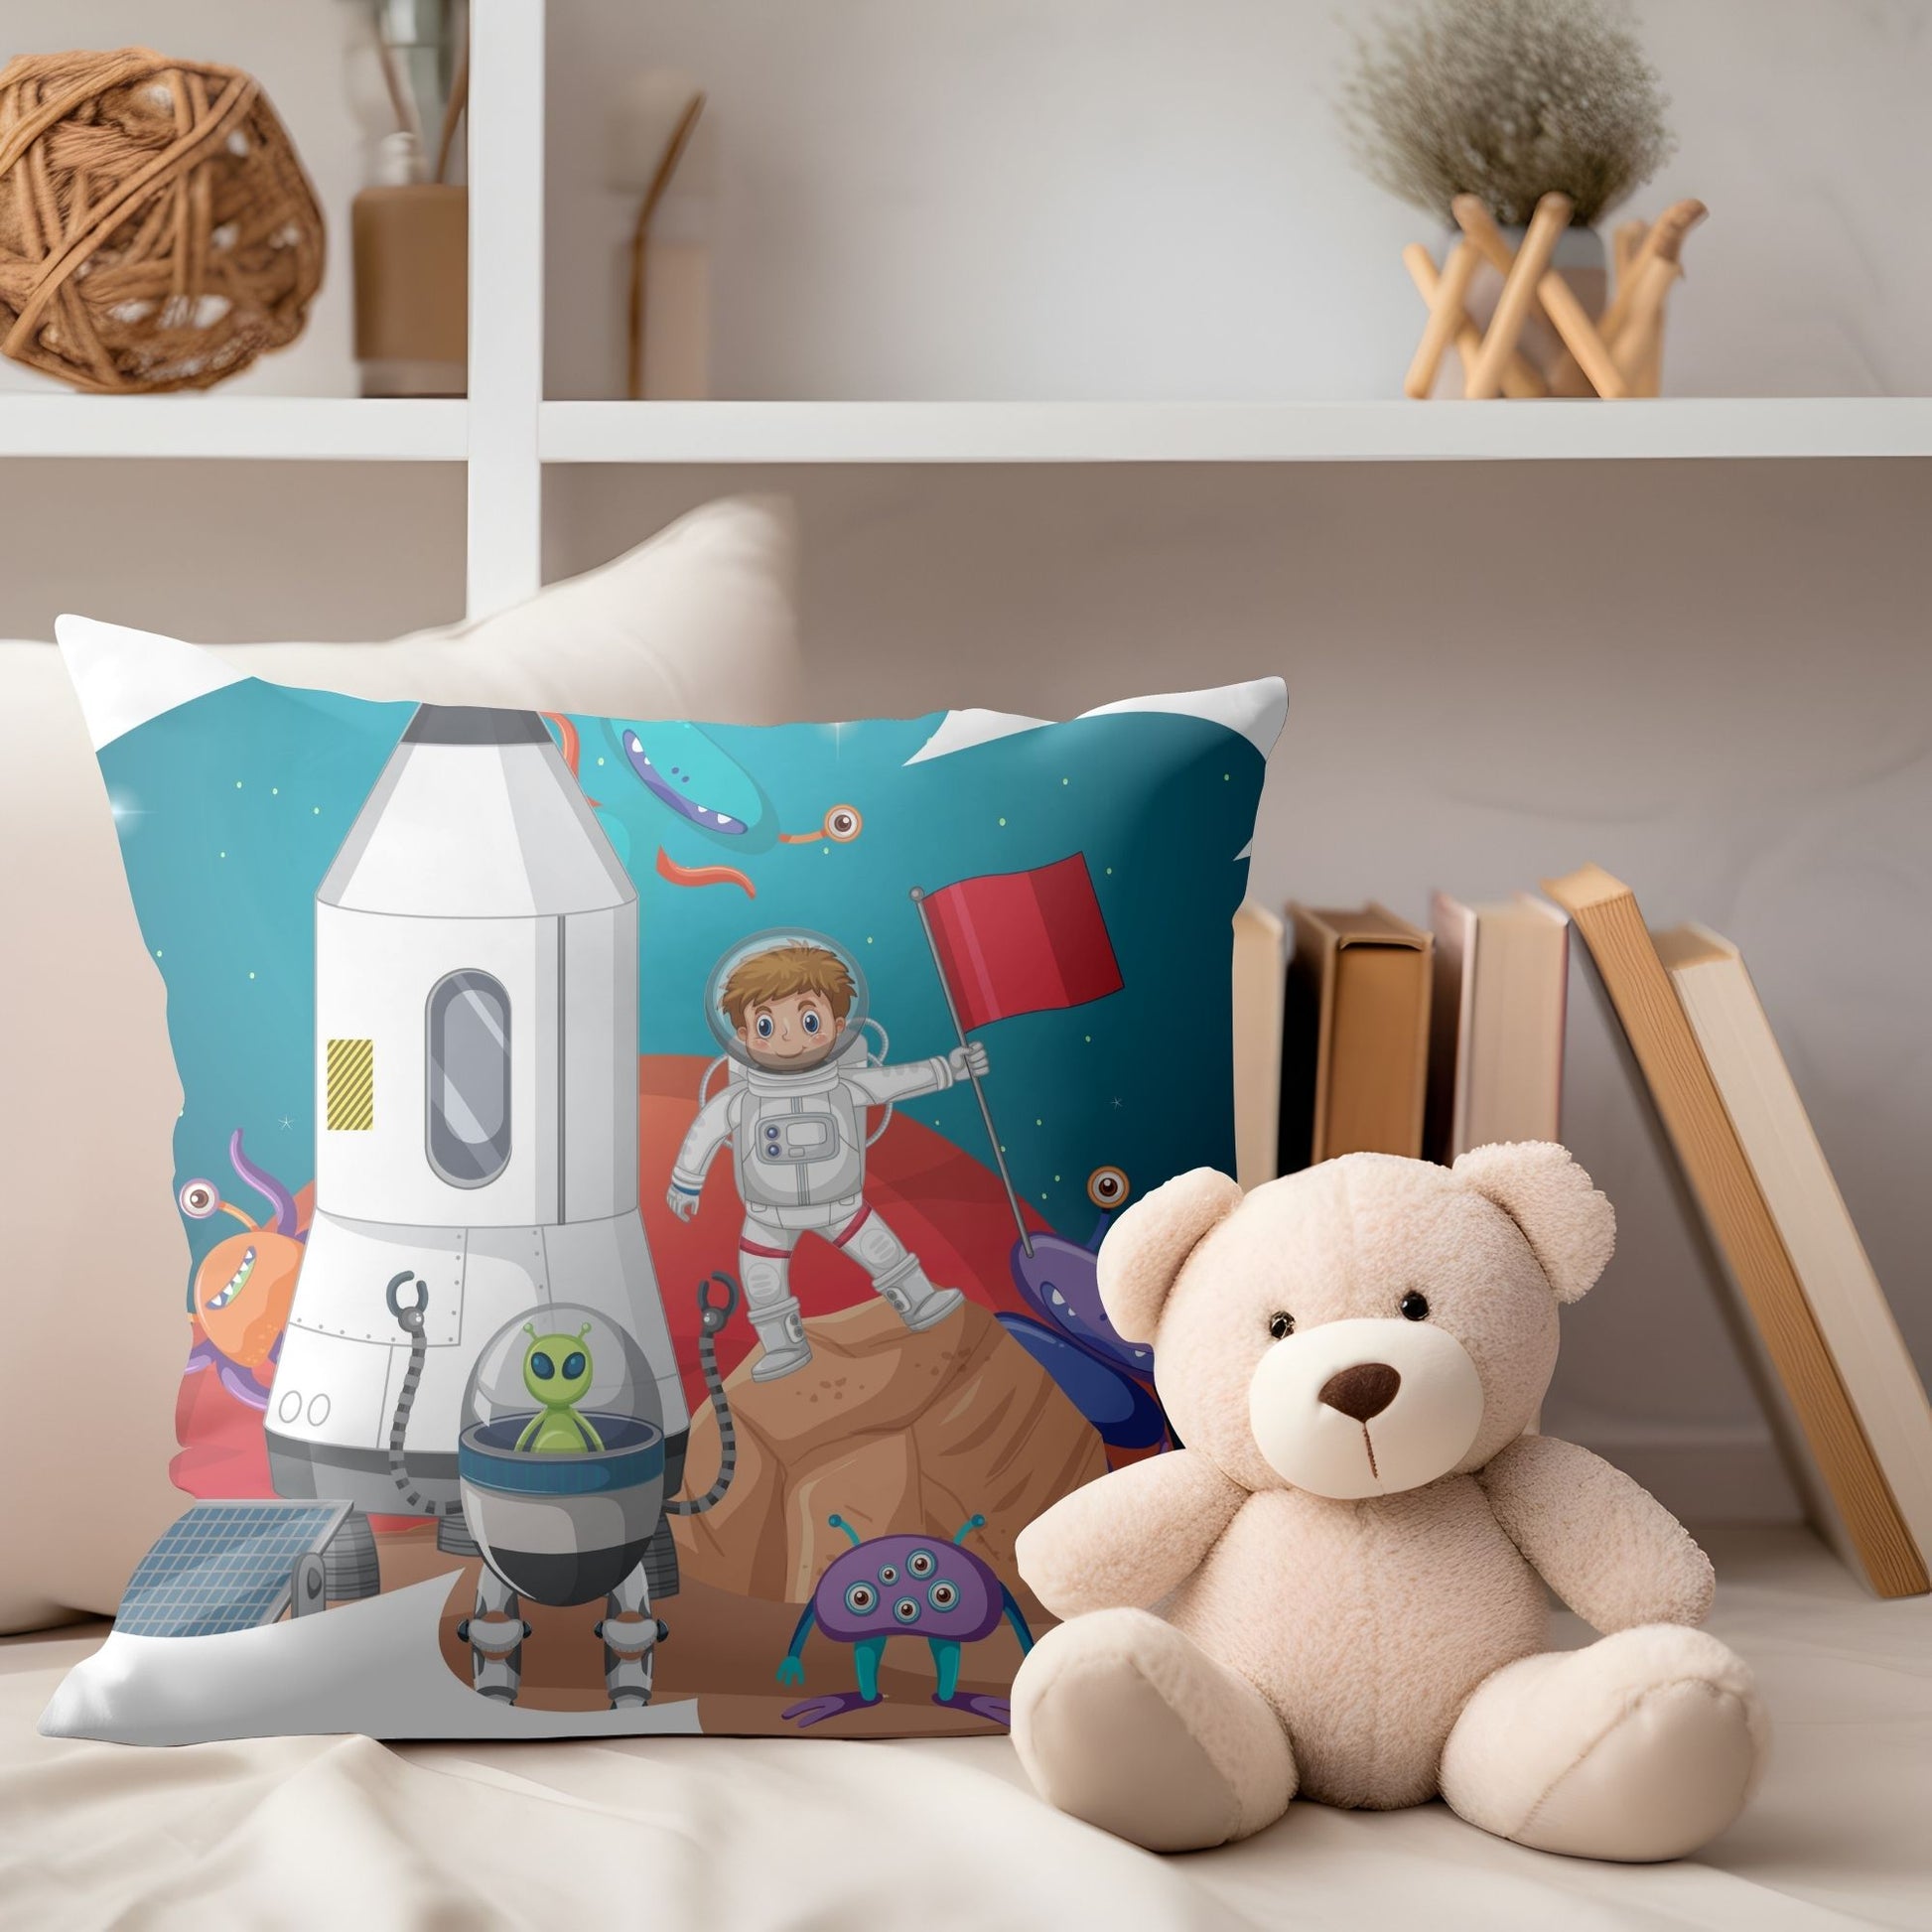 Whimsical kids pillow showcasing a little boy's space mission for imaginative play.